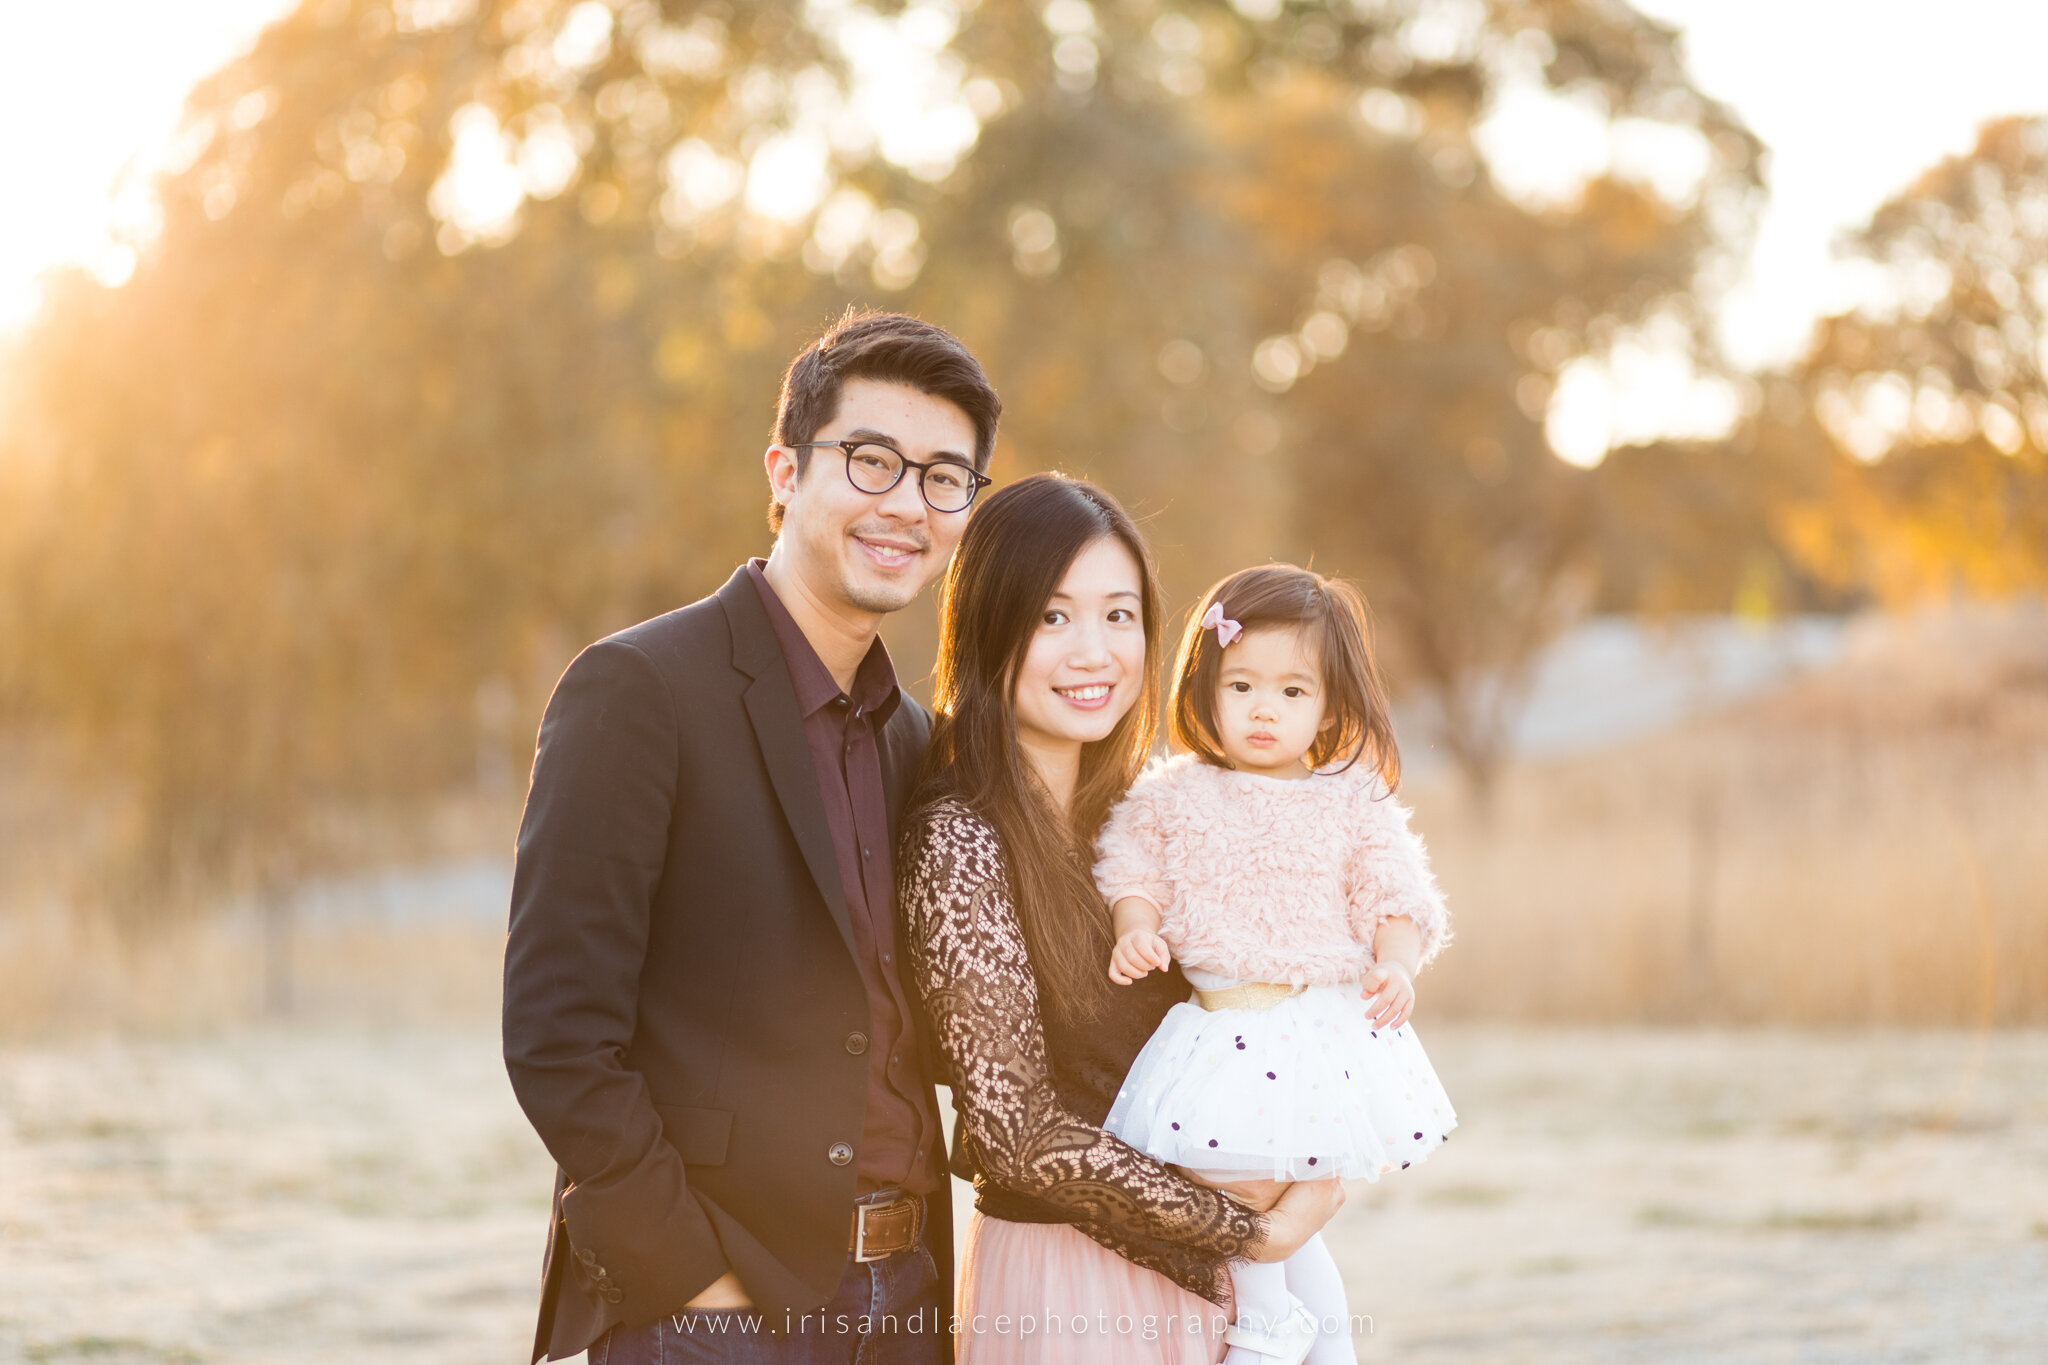 Outdoor Fall Family Photoshoot in Palo Alto  |  Iris and Lace Photography |  SF Bay Area Photographer